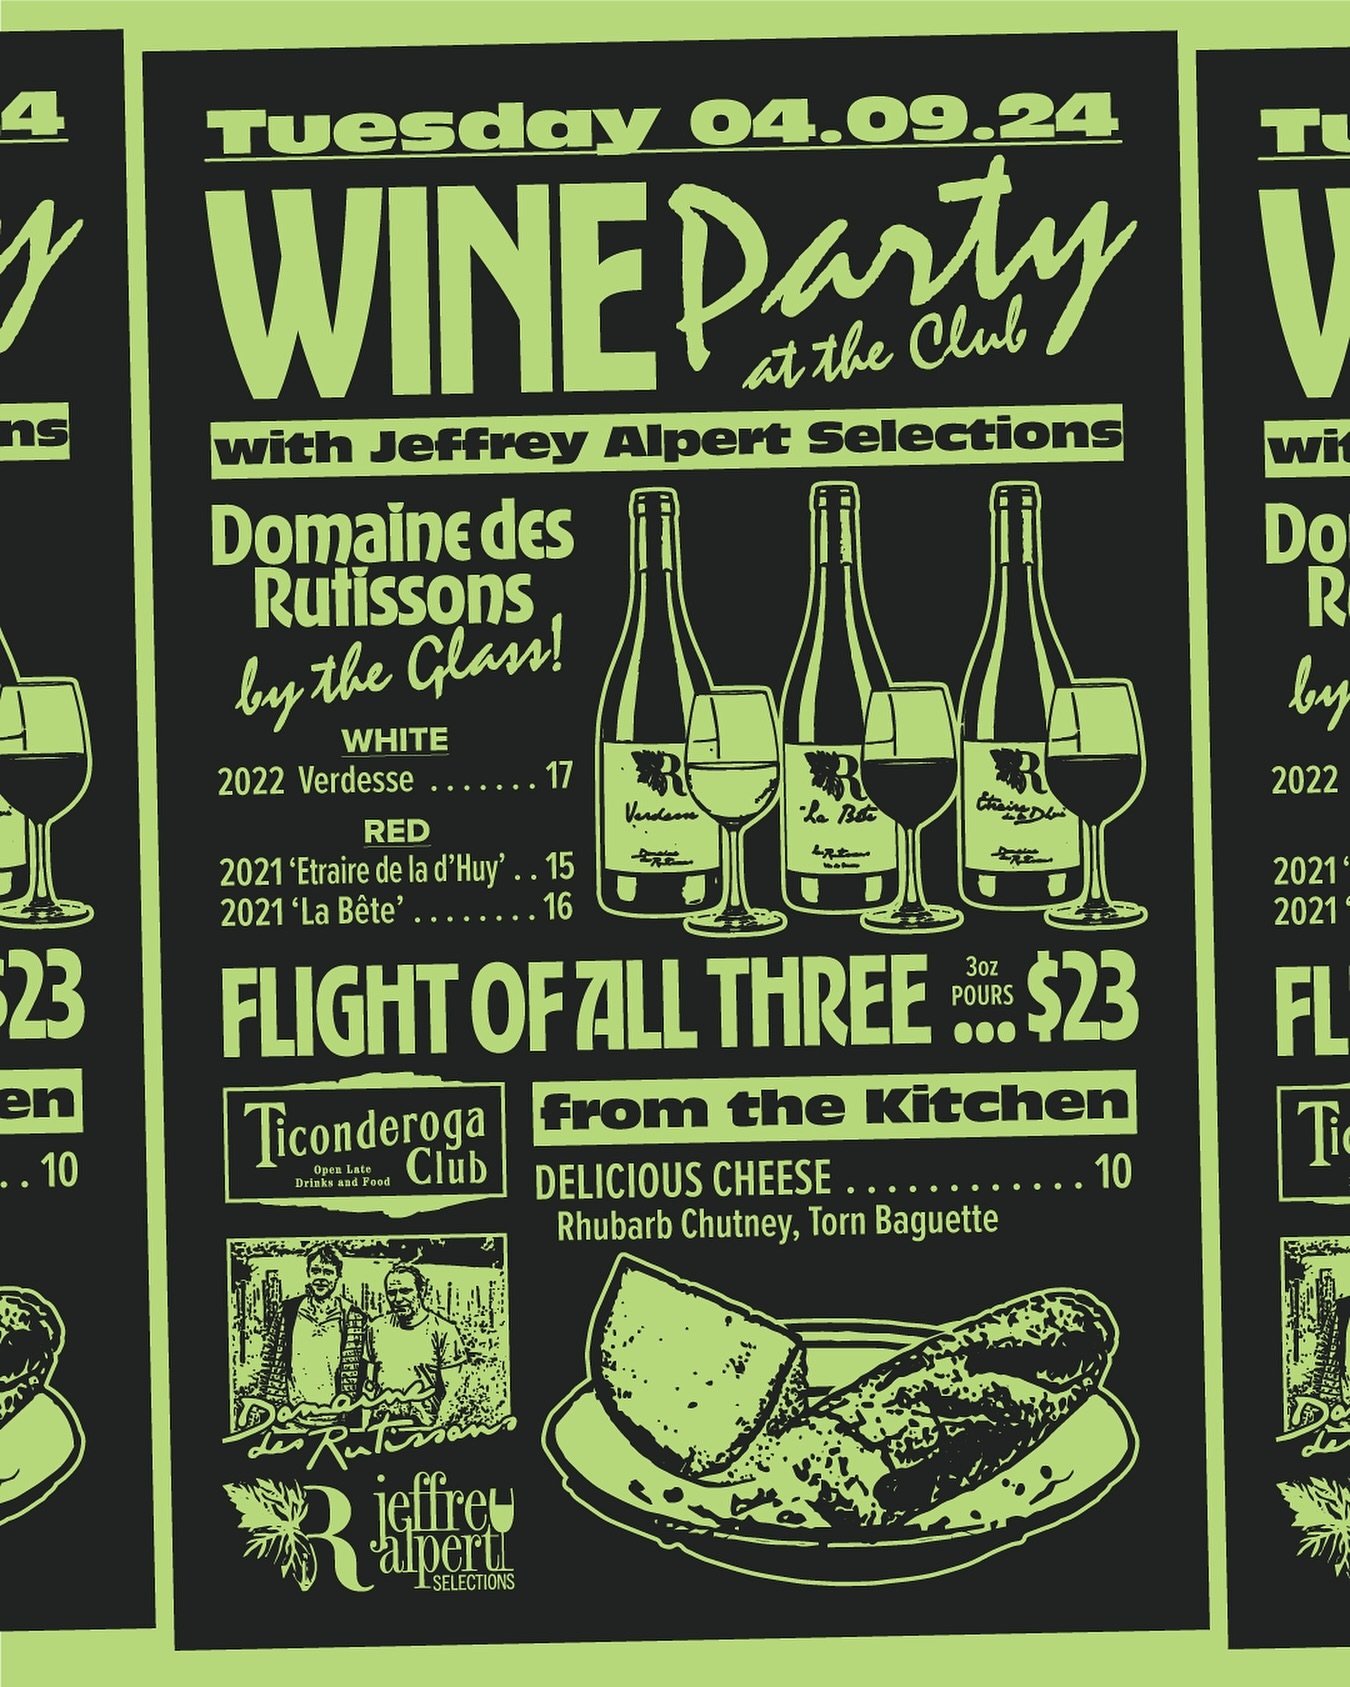 WINE PARTY TONIGHT: @jeffreyalpertselections will be at The Club with @rivegauchewineco to serve 3 bottles of @domainedesrutissons&rsquo; killer wines BY THE GLASS. @dbeezatl has some Delicious Cheese to pair! #TGIT indeed